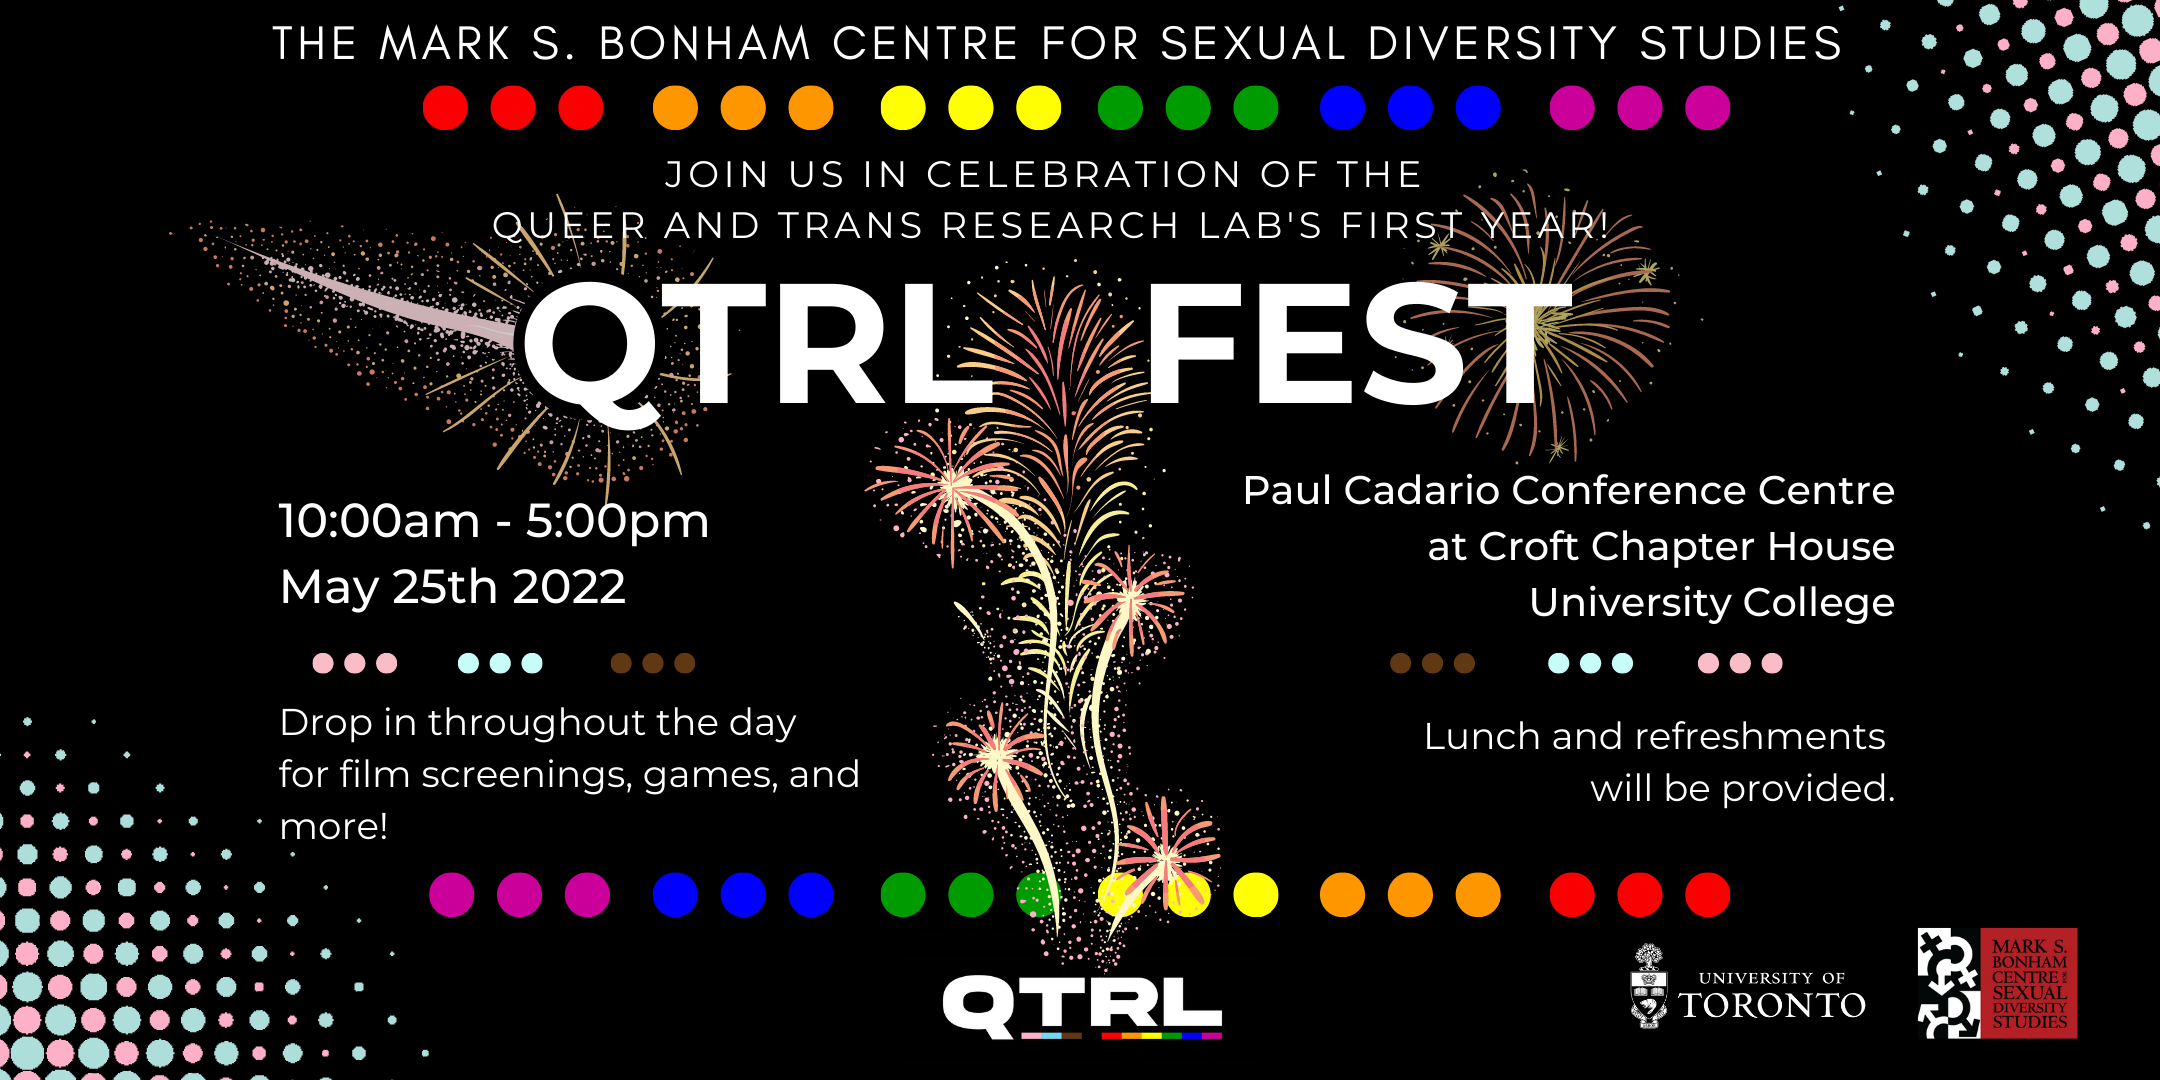 Banner with event details contained in the post, featuring visuals of fireworks and the colours of the LGBTQIAP2S+ flag against a black background. Logos for QTRL, UofT, Bonham Centre.